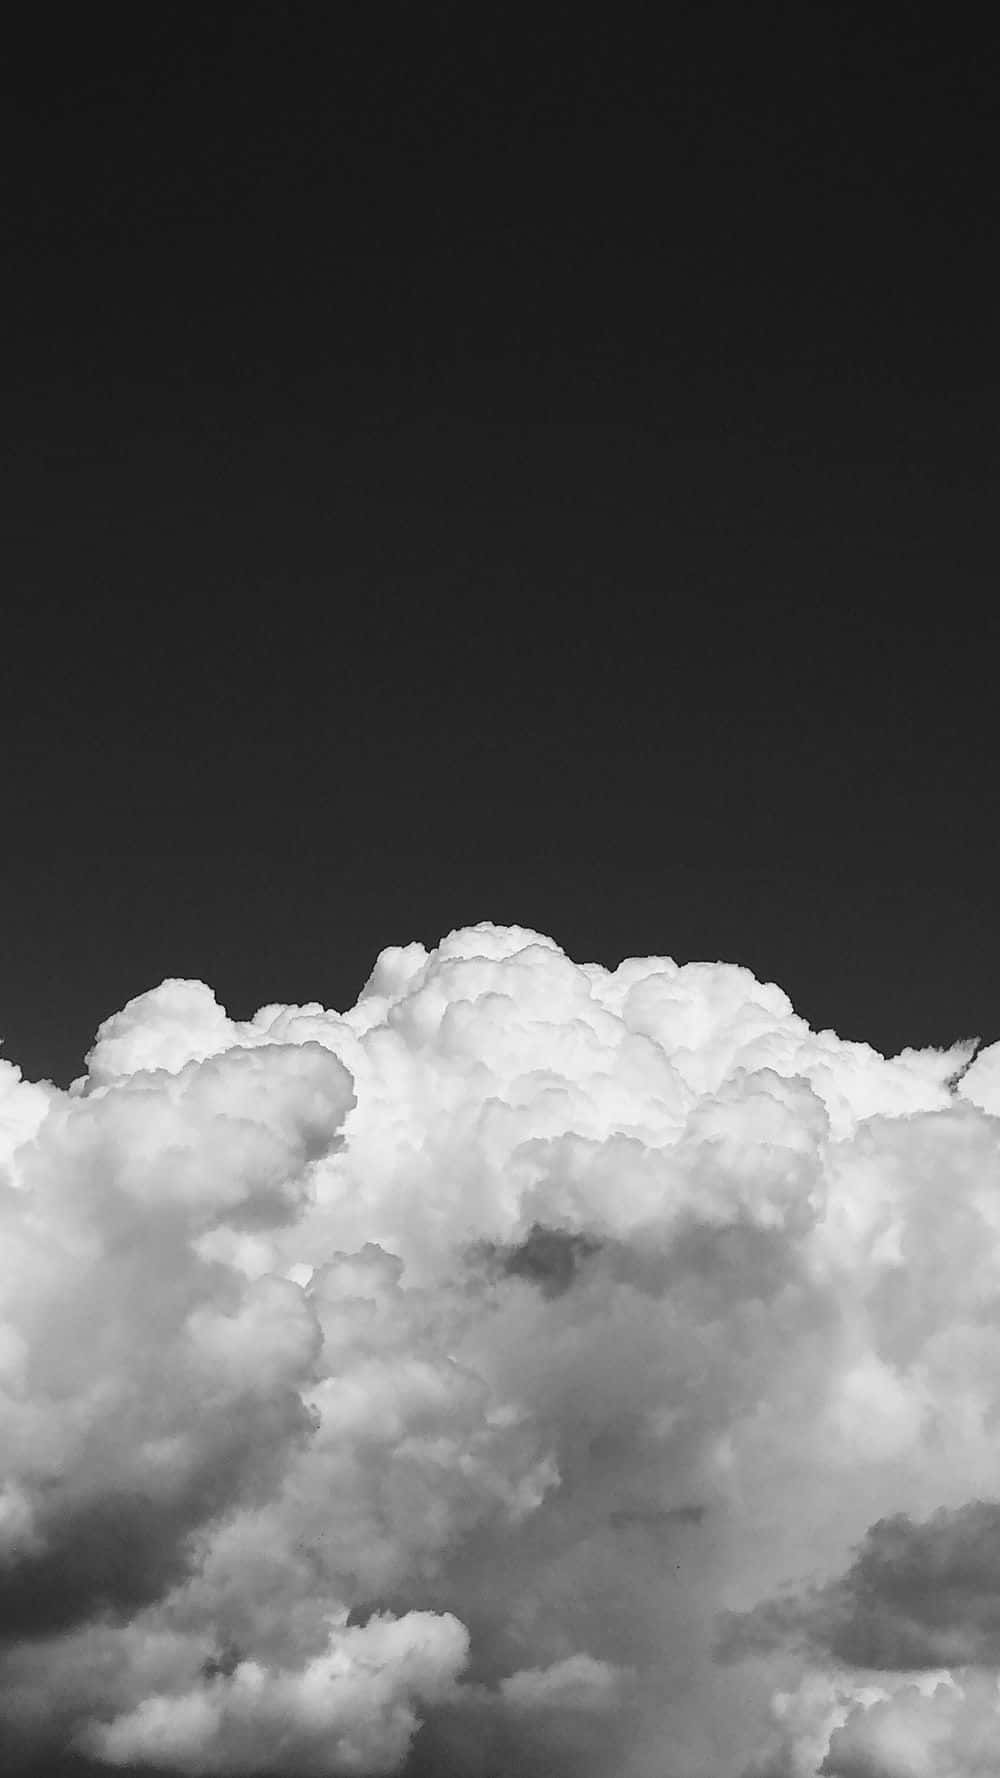 Download Gloomy Sky Black And White Cloud Wallpaper | Wallpapers.com